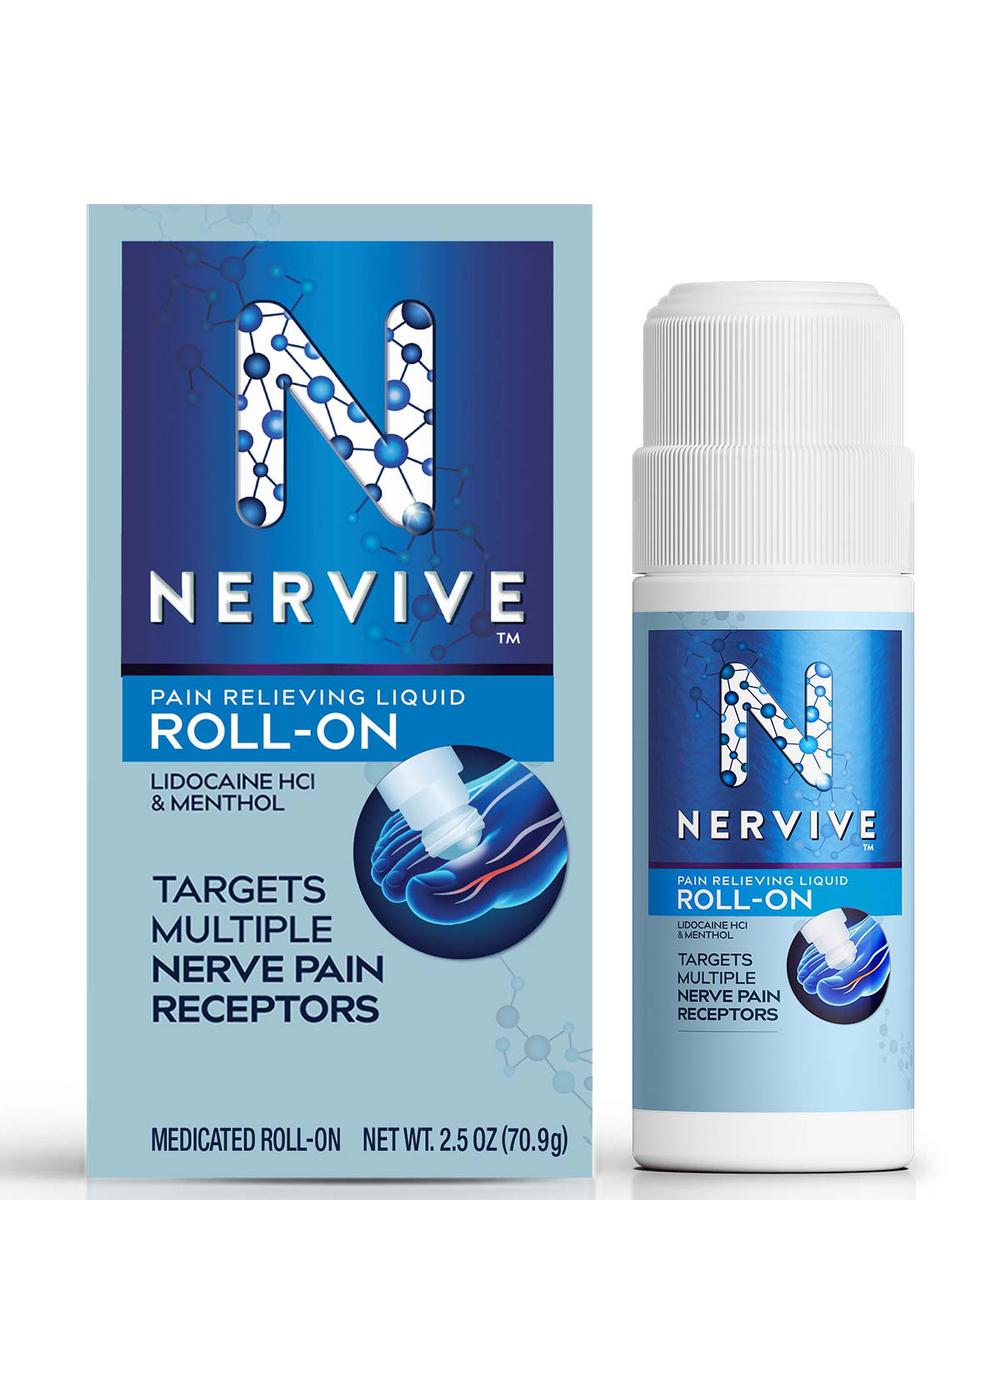 Nervive Max Strength Nerve Care Pain Relieving Roll-On Liquid; image 6 of 10